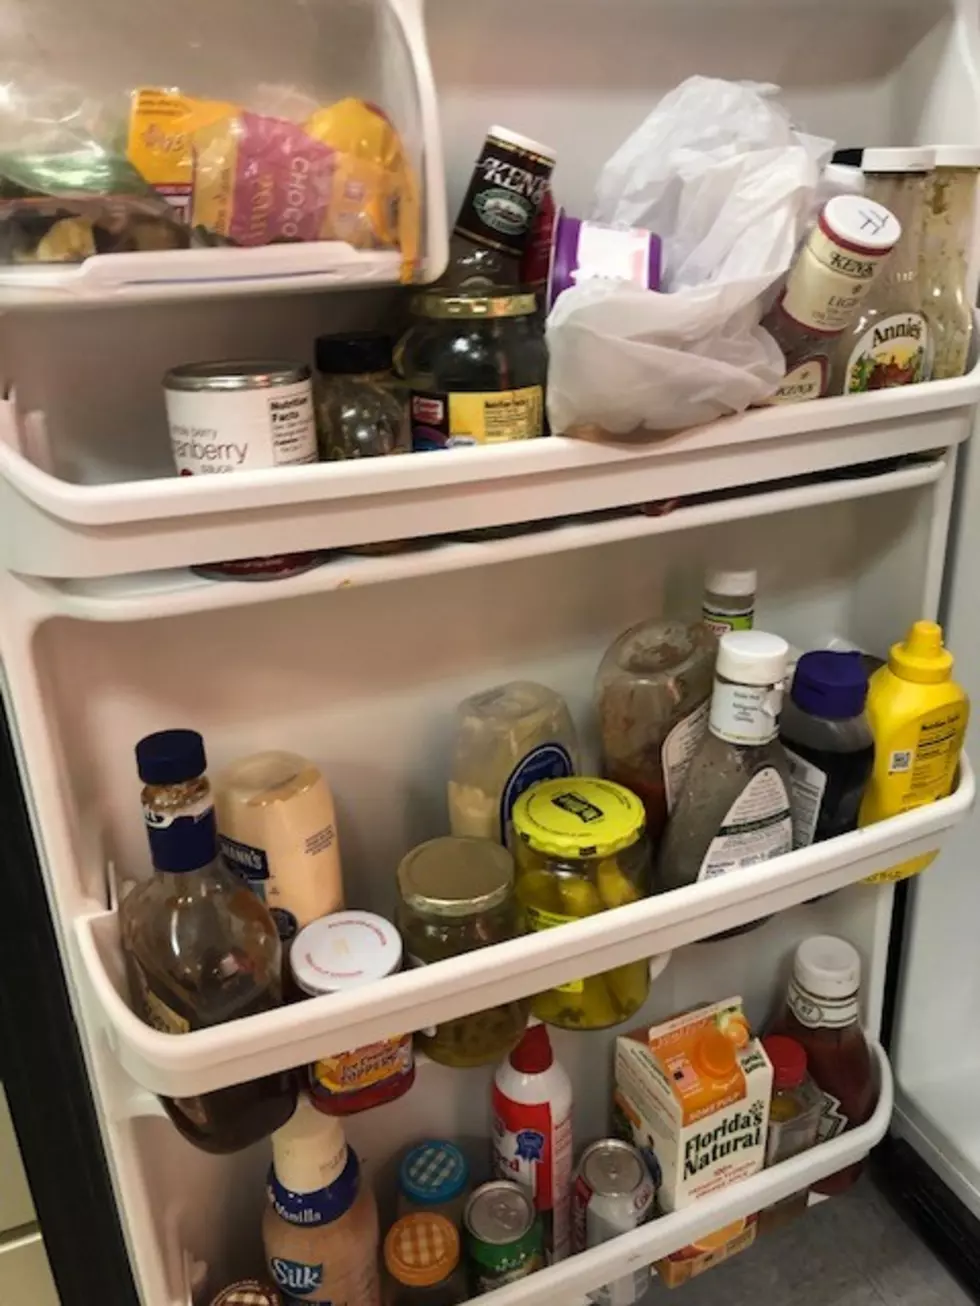 Does Your Work Refrigerator Look Like Ours?